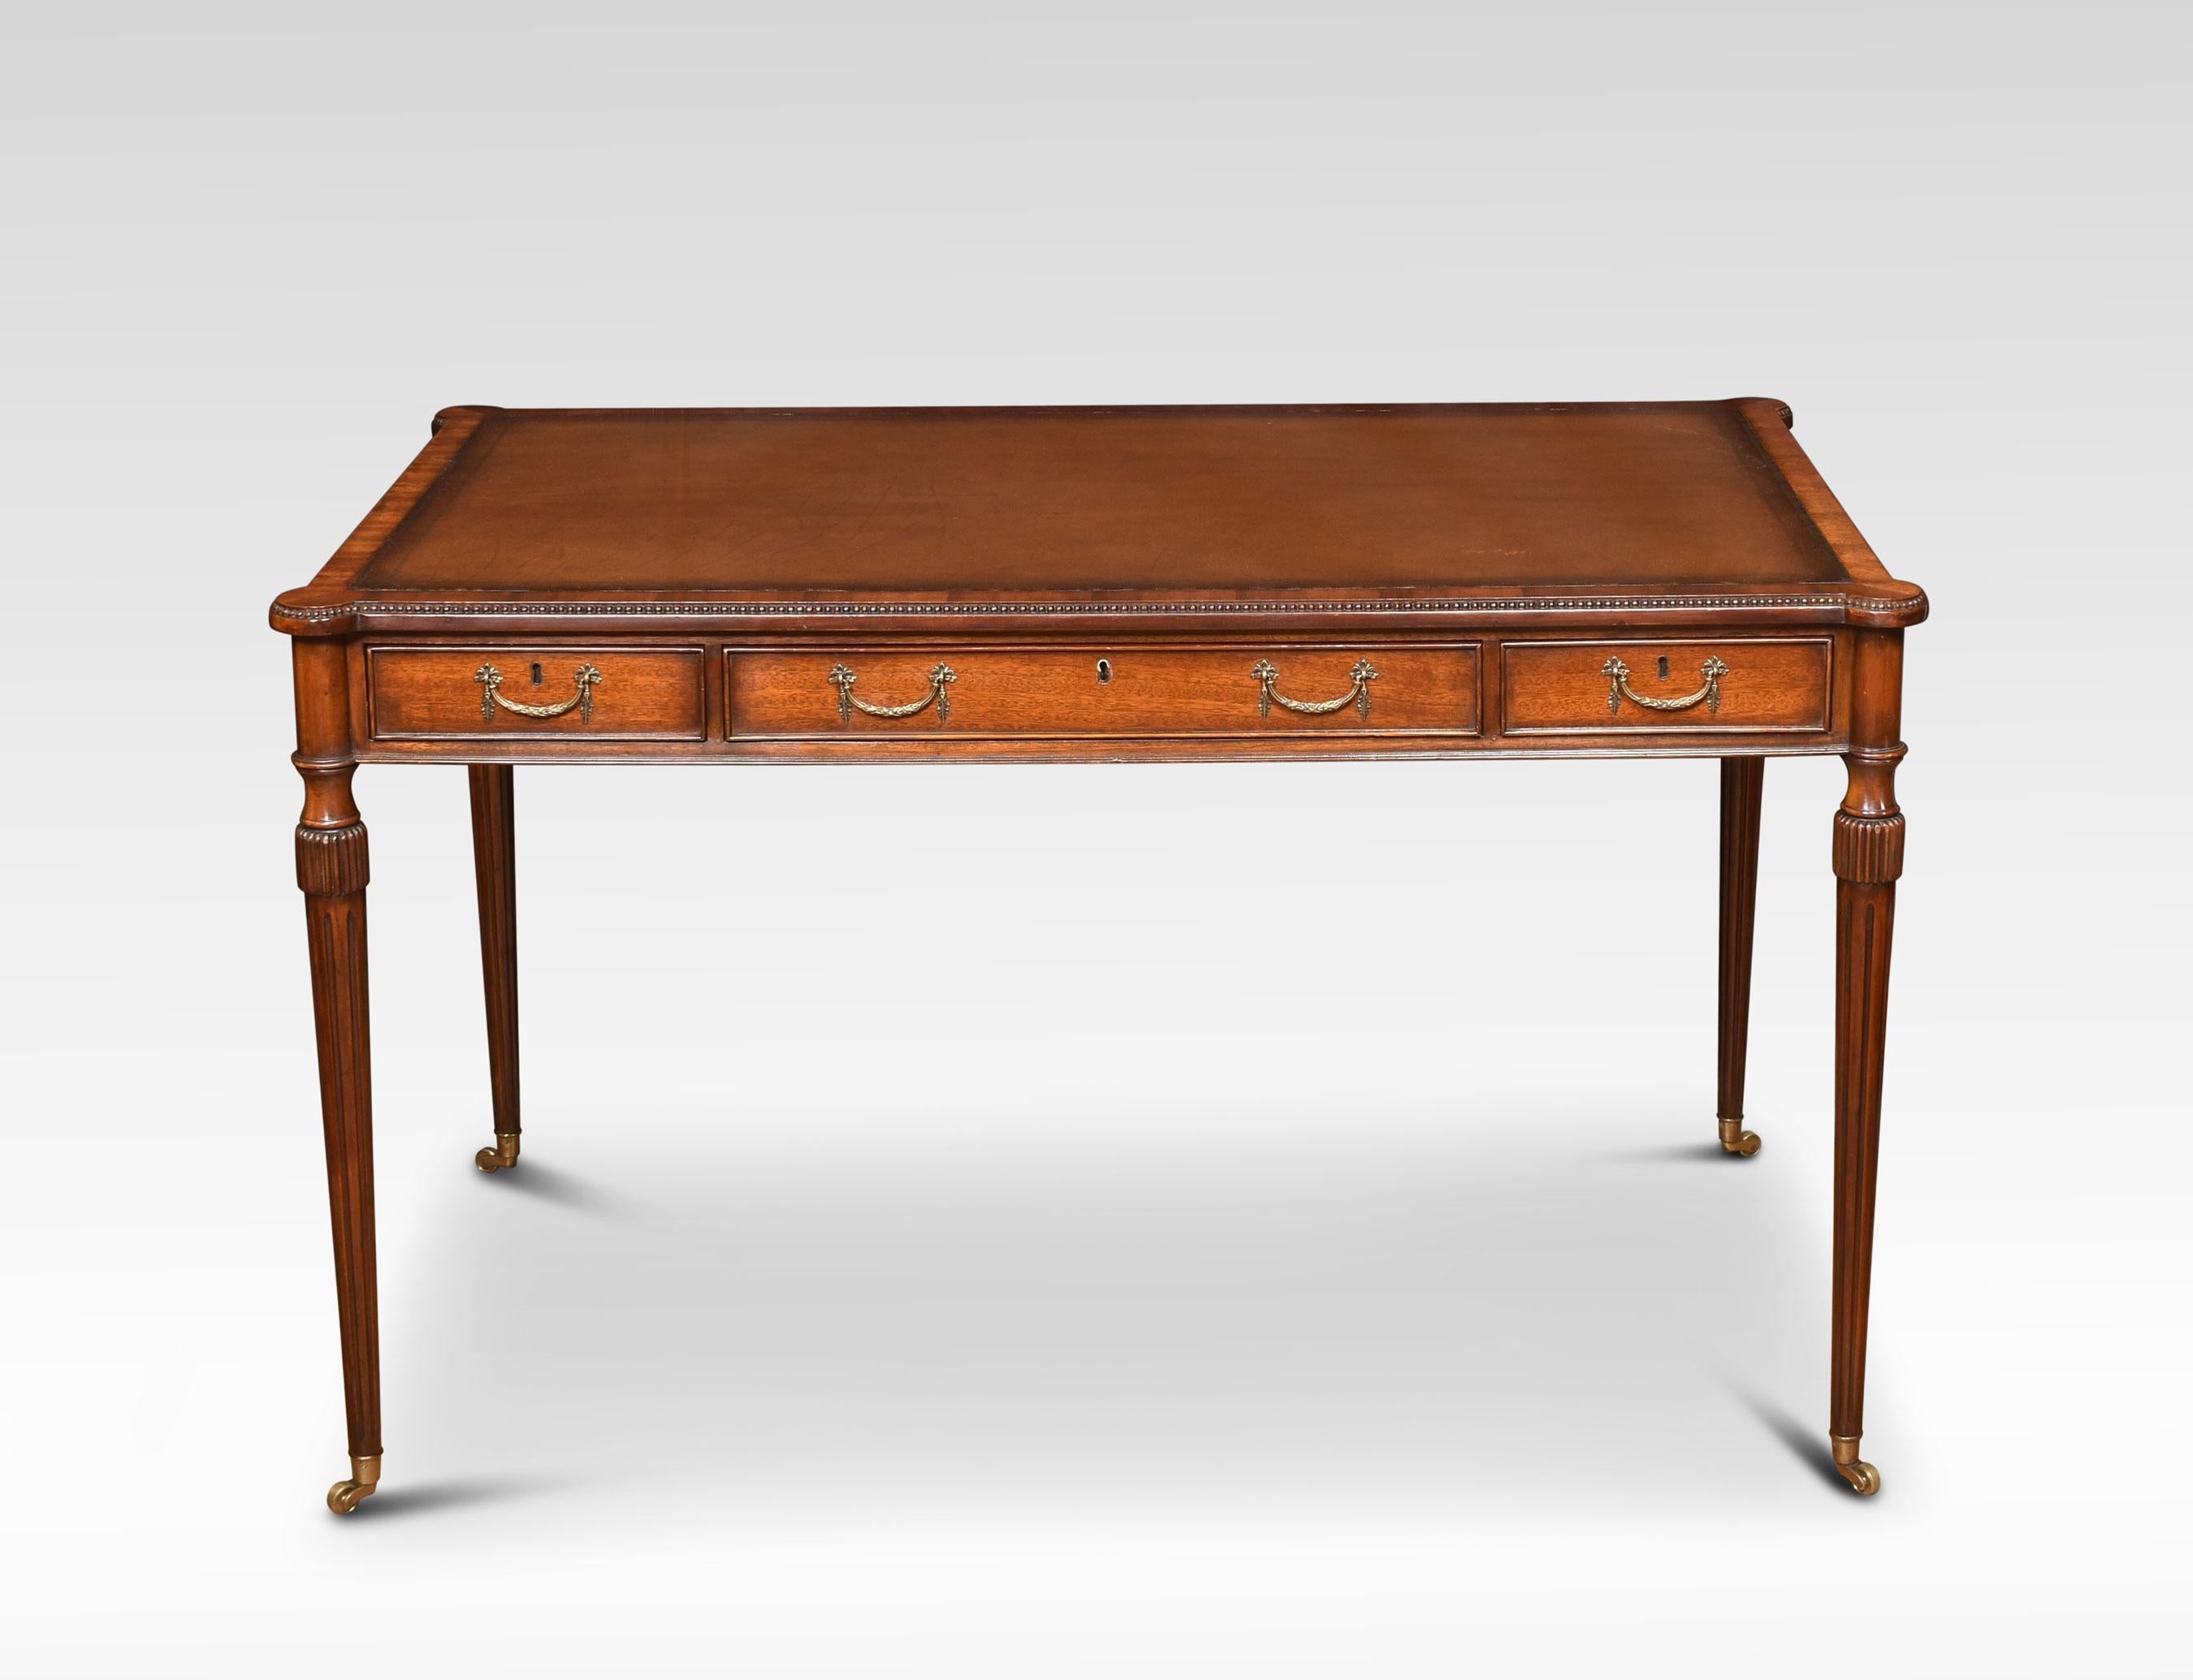 Mahogany three drawer writing table the rectangular top with inset brown tooled leather top above three drawers with brass handles. Raised up on reeded turned legs with brass casters united by shaped stretcher.
Dimensions
Height 30 inches
Width